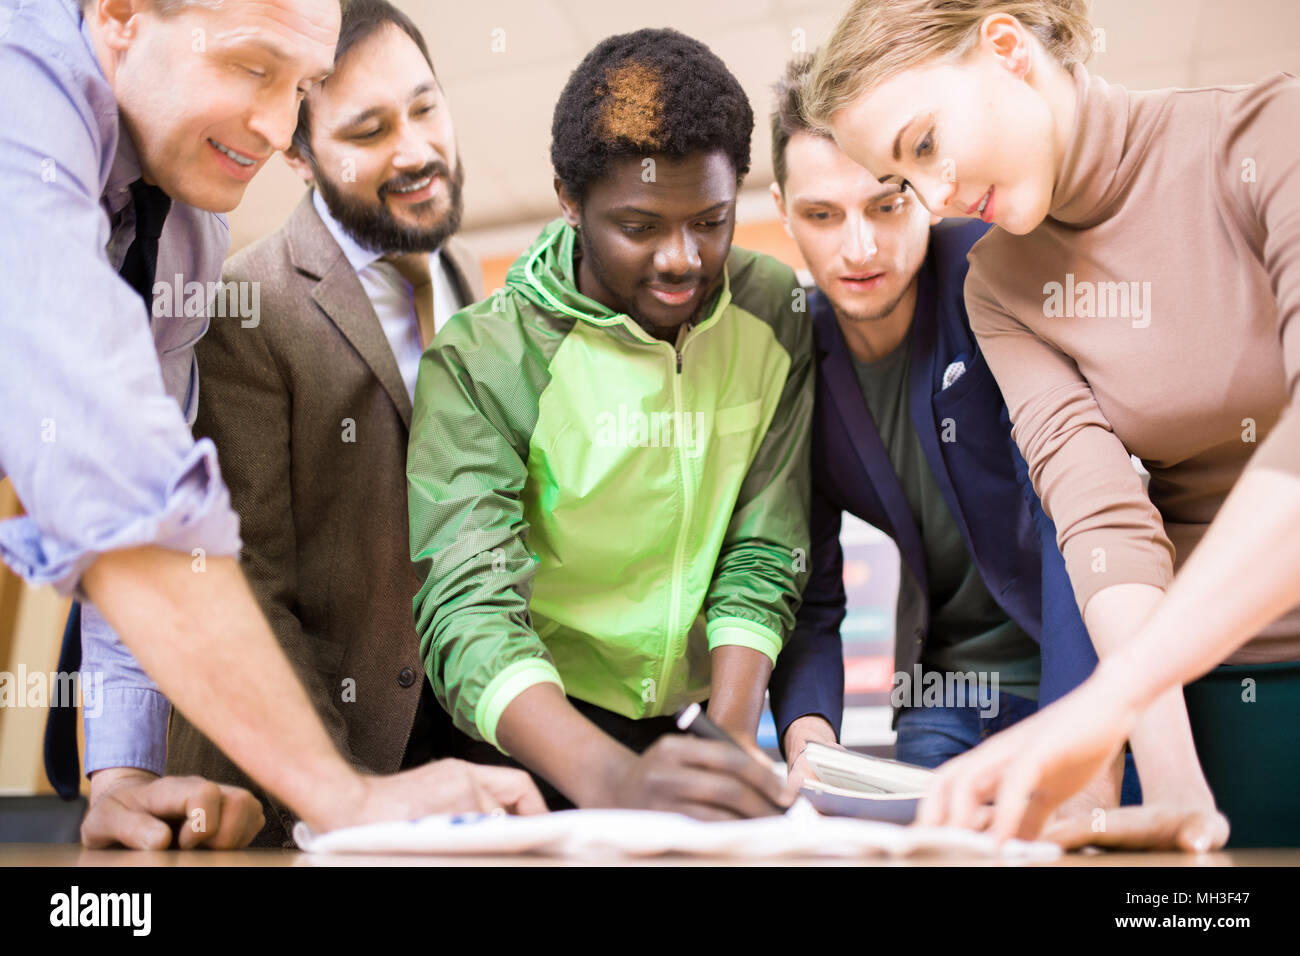 Football Player Signing Flag Stock Photo